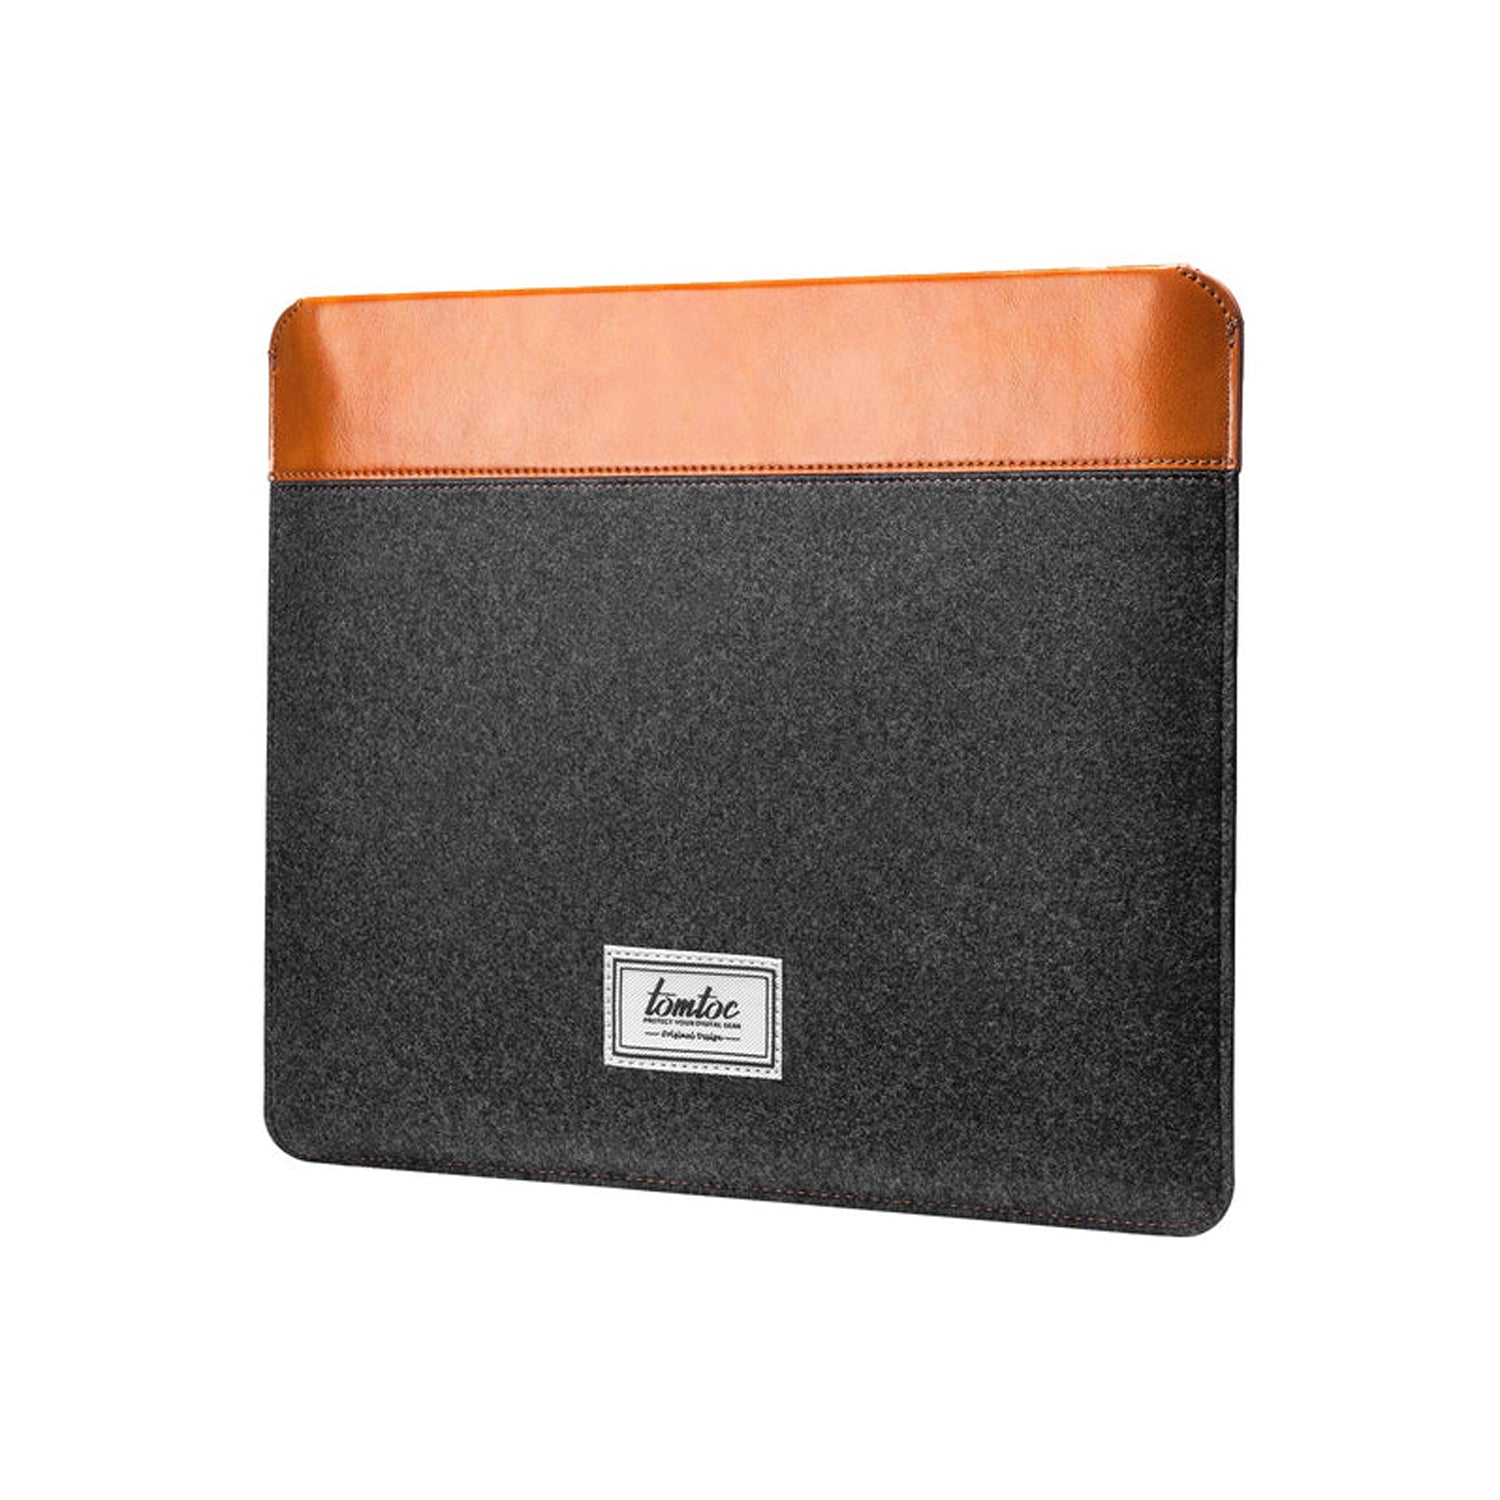 Tomtoc Vintage H16 Laptop Sleeve for up to 13 / 16-Inch MacBook Pro